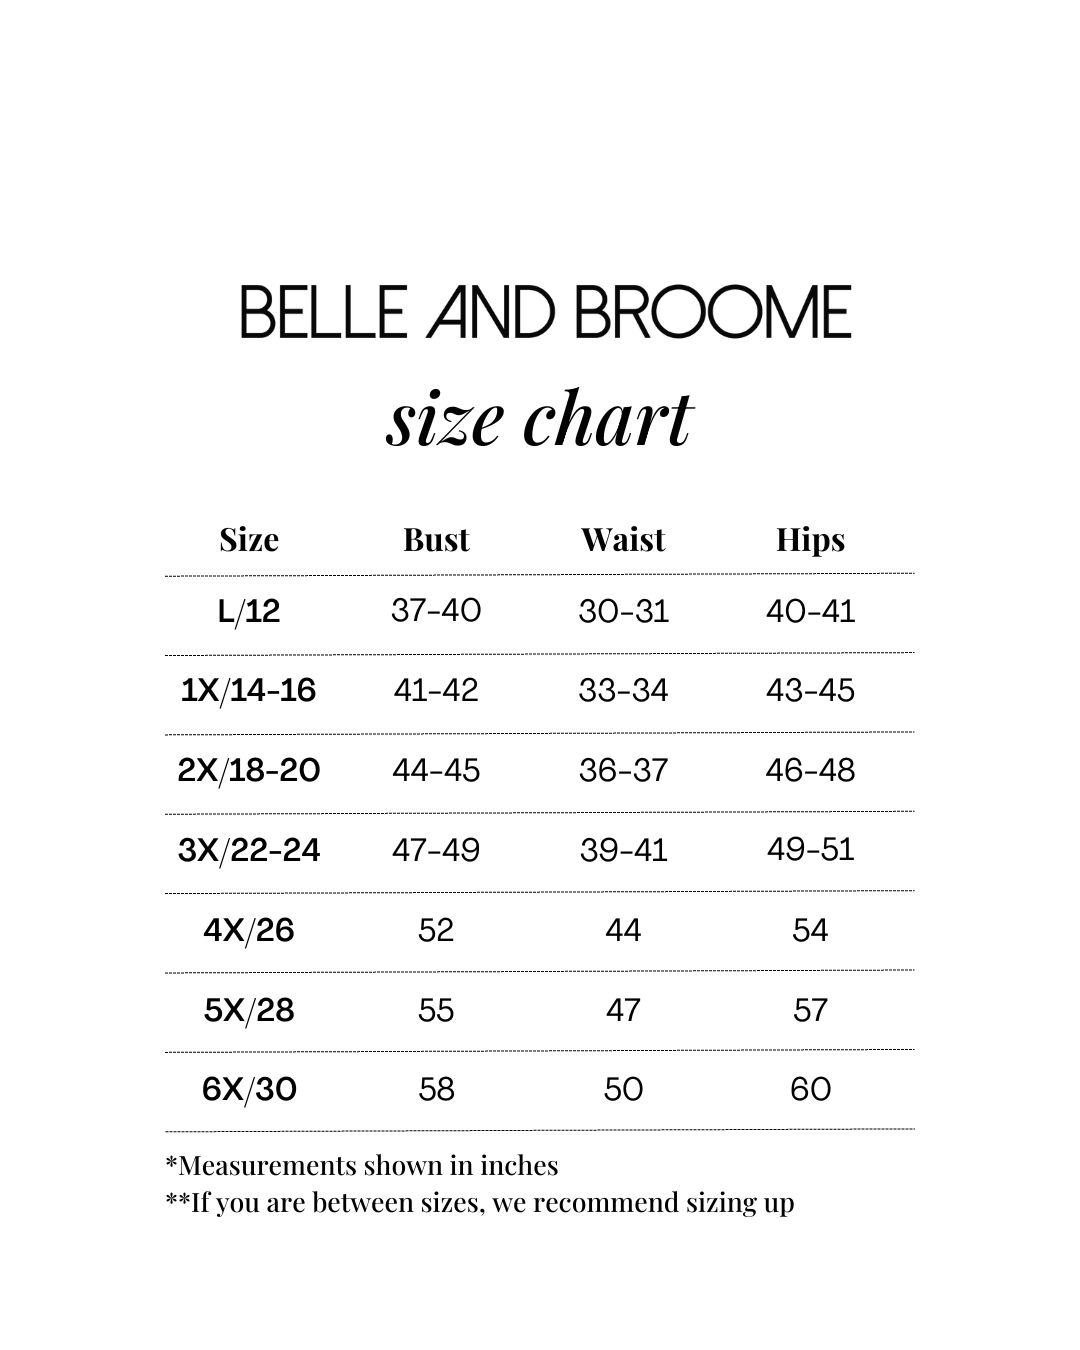 Belle and Broome size chart